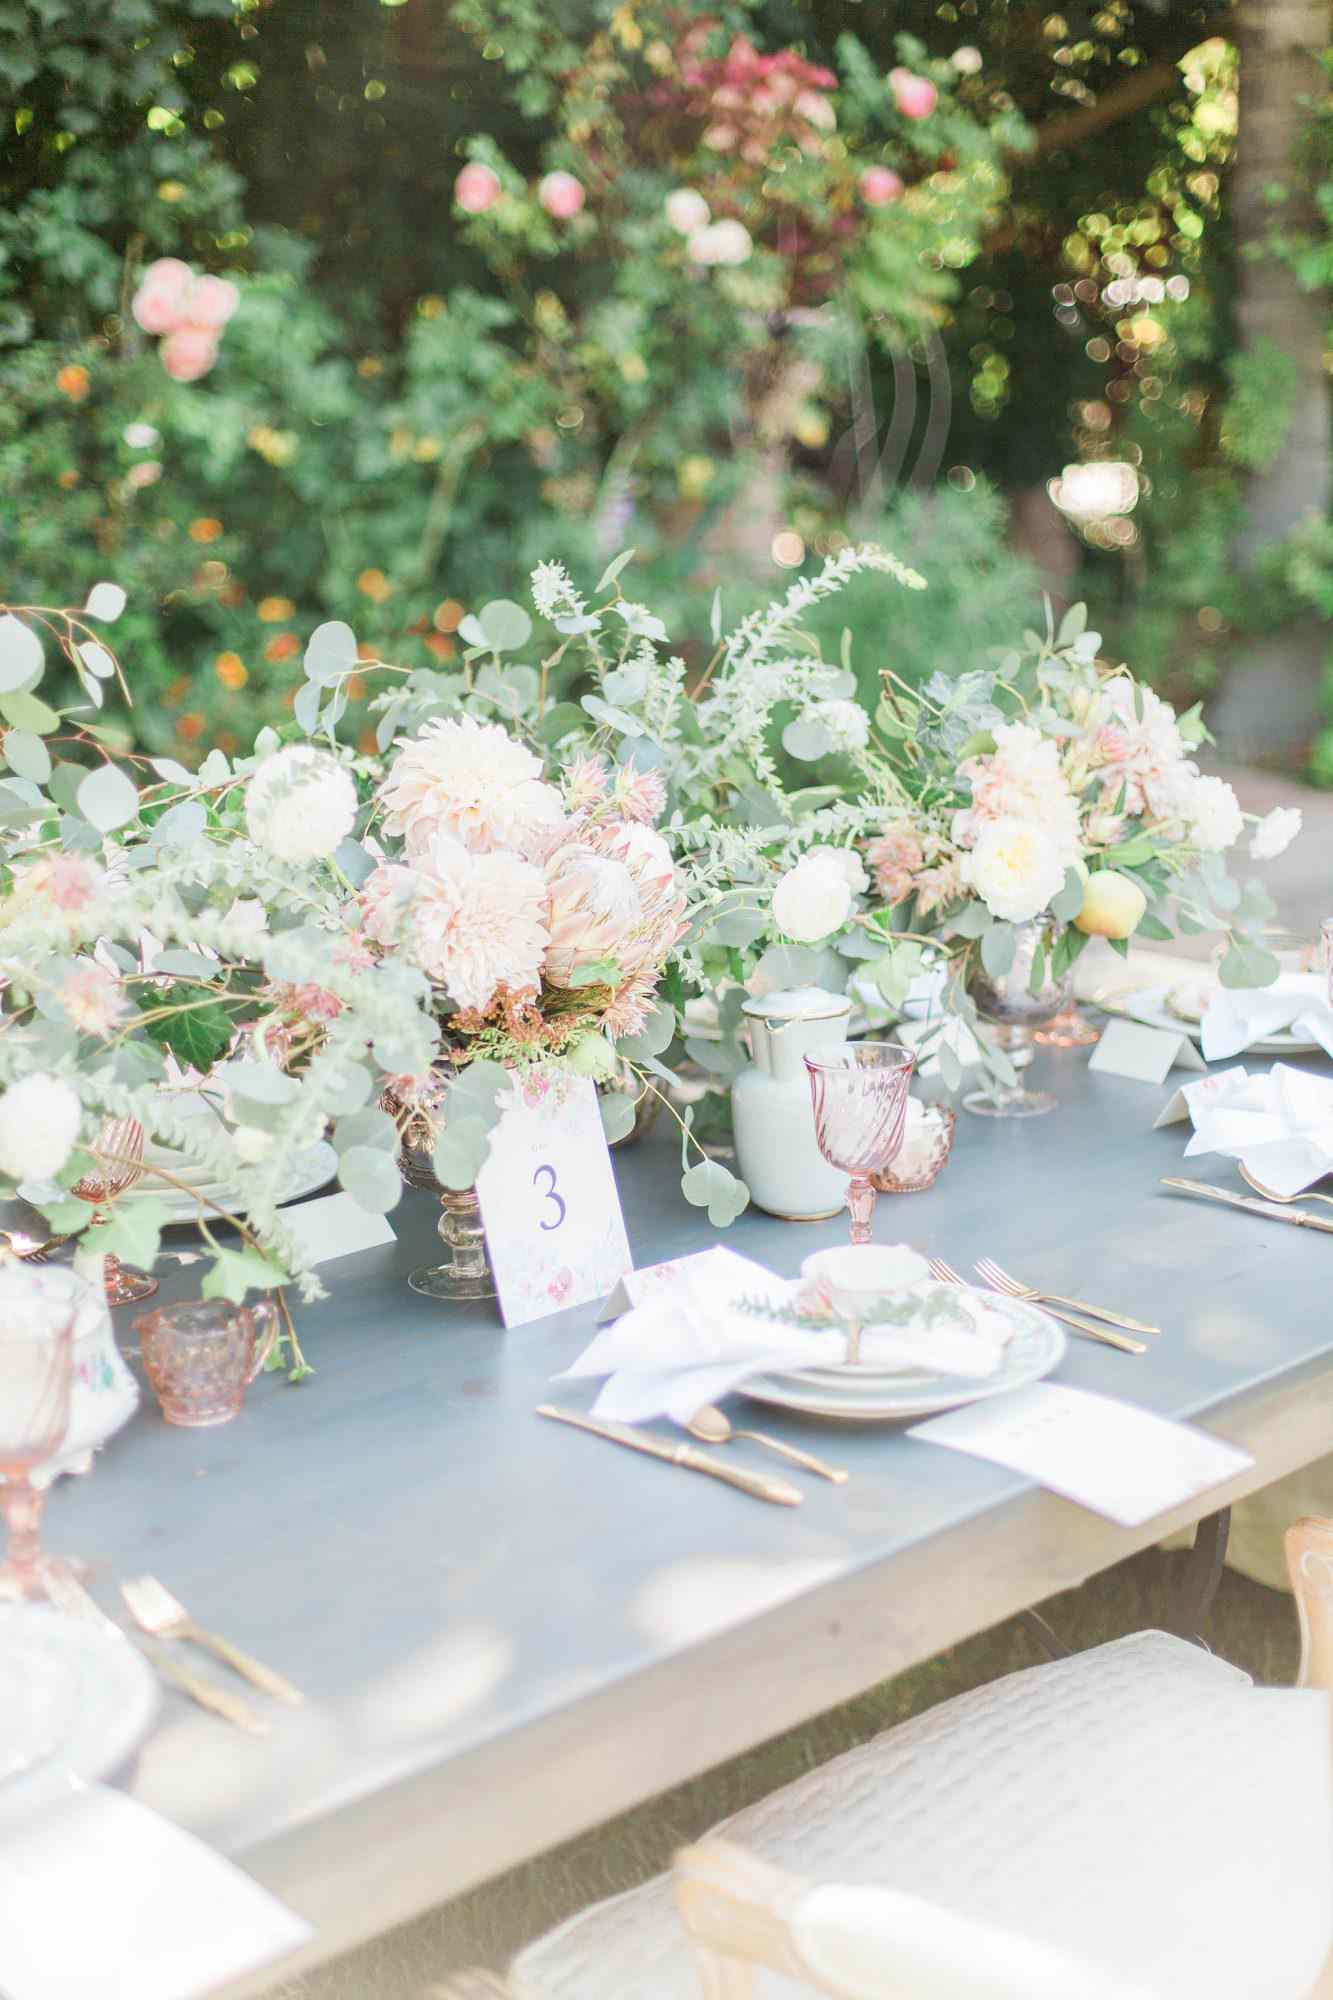 Loose, Romantic Cluster Centerpieces at Outdoor Wedding